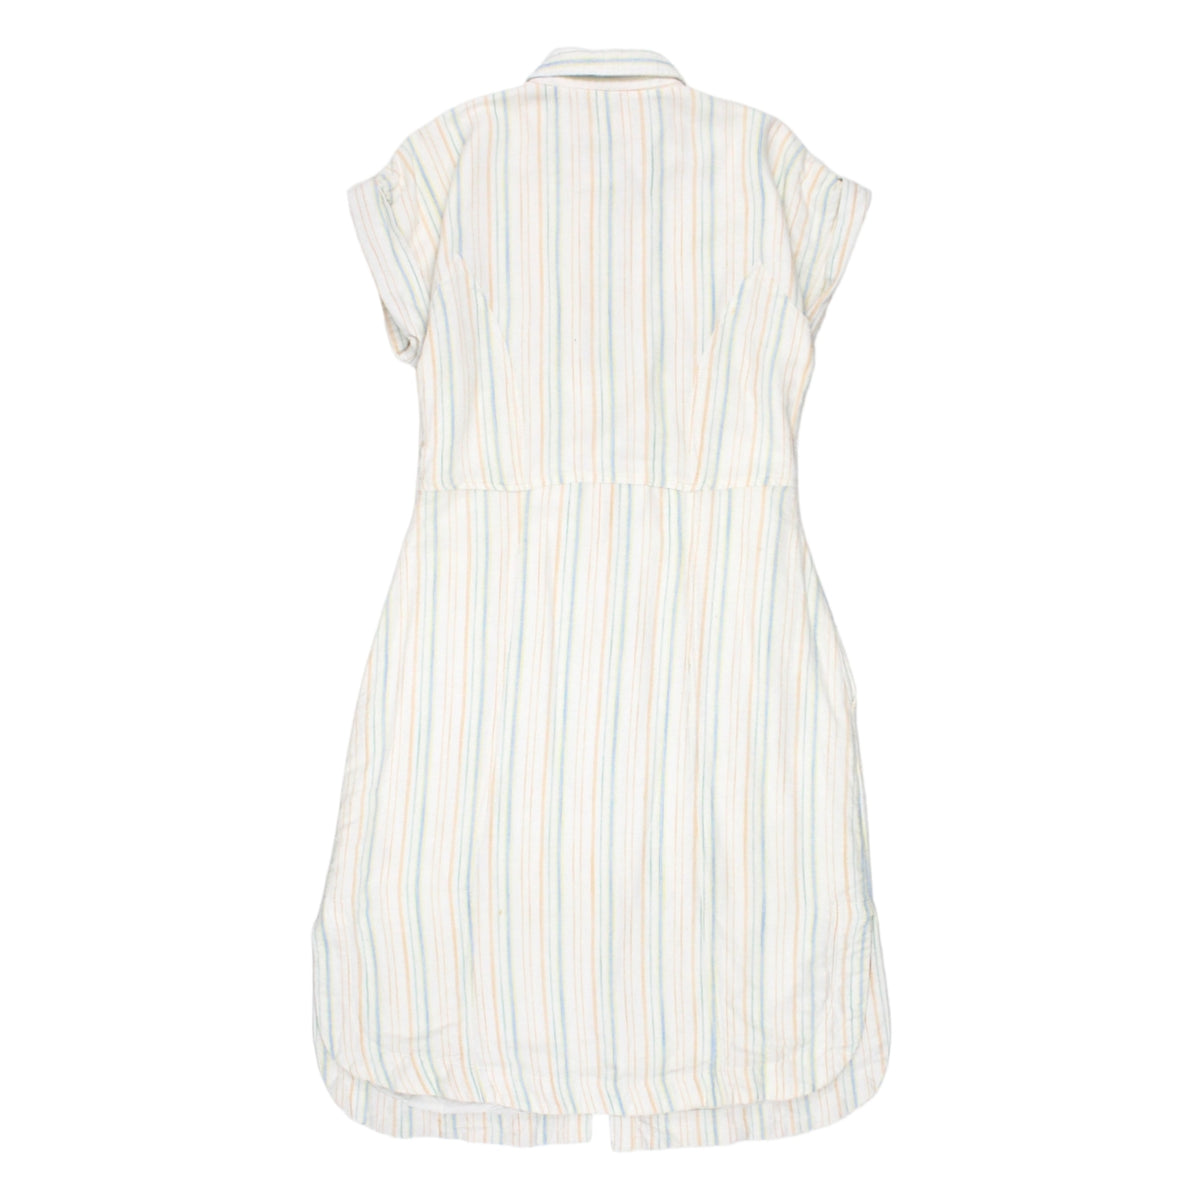 Maeve White Striped Tie Front Shirtdress